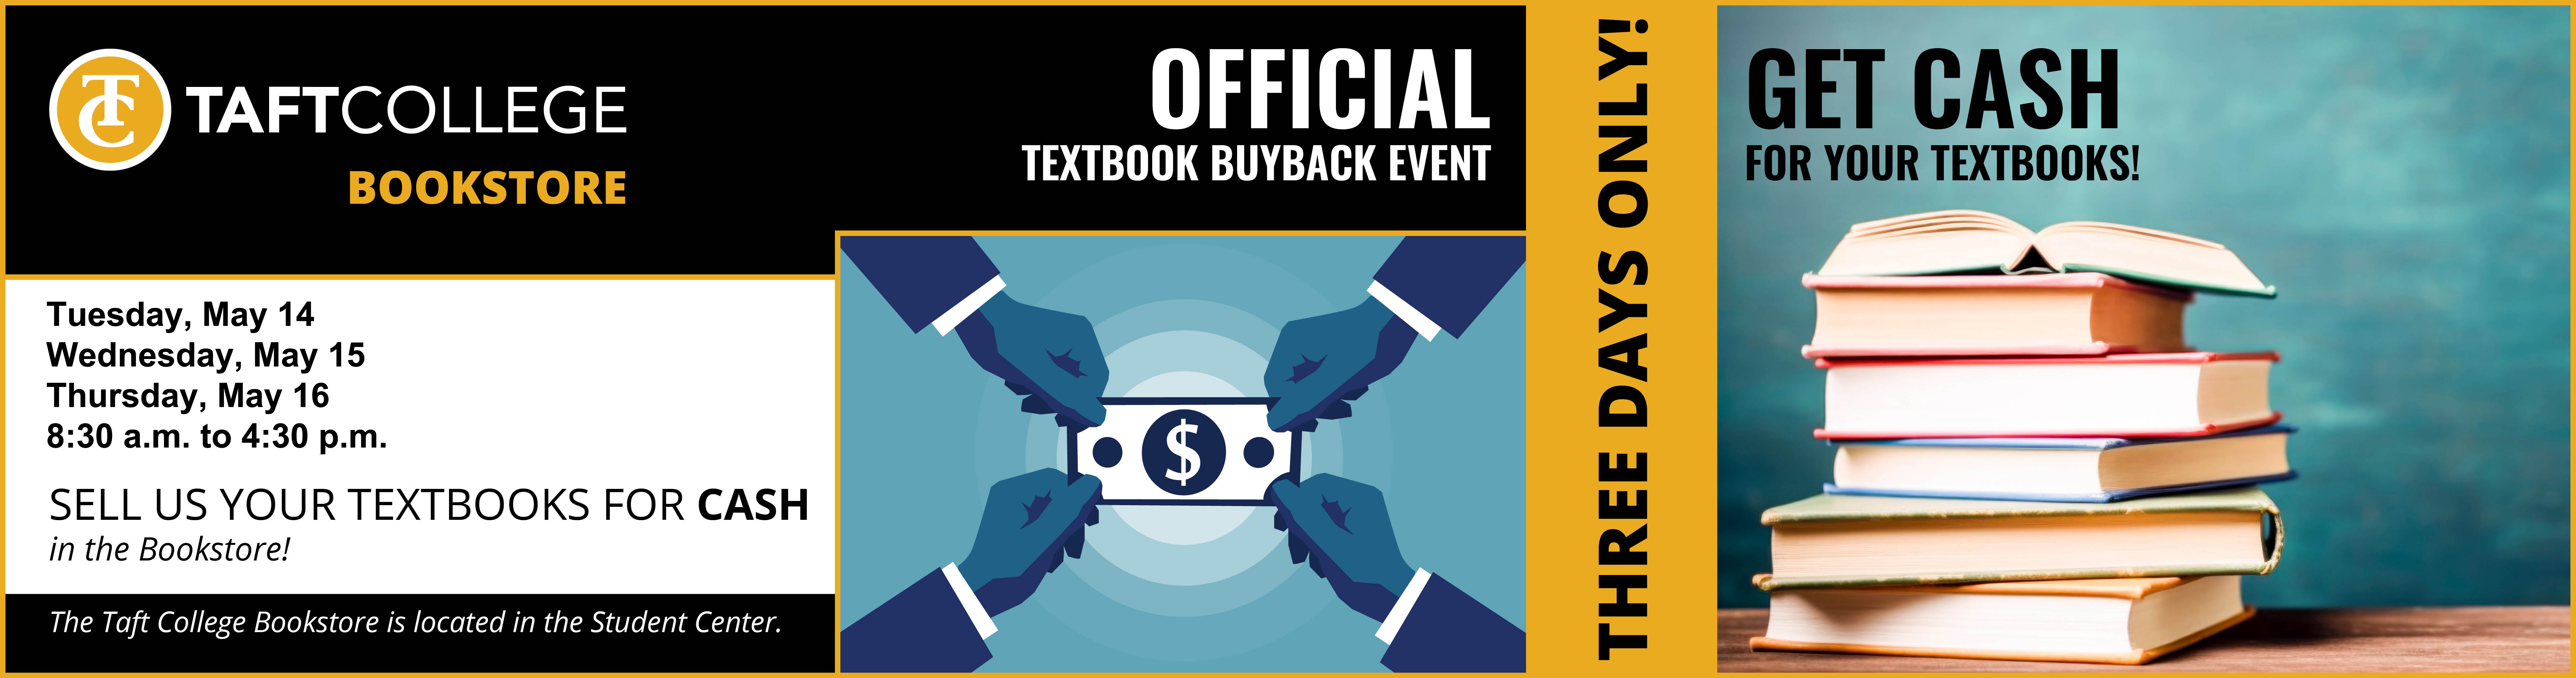 Taft College Bookstore Official Textbook Buyback Event - May 14 to May 16